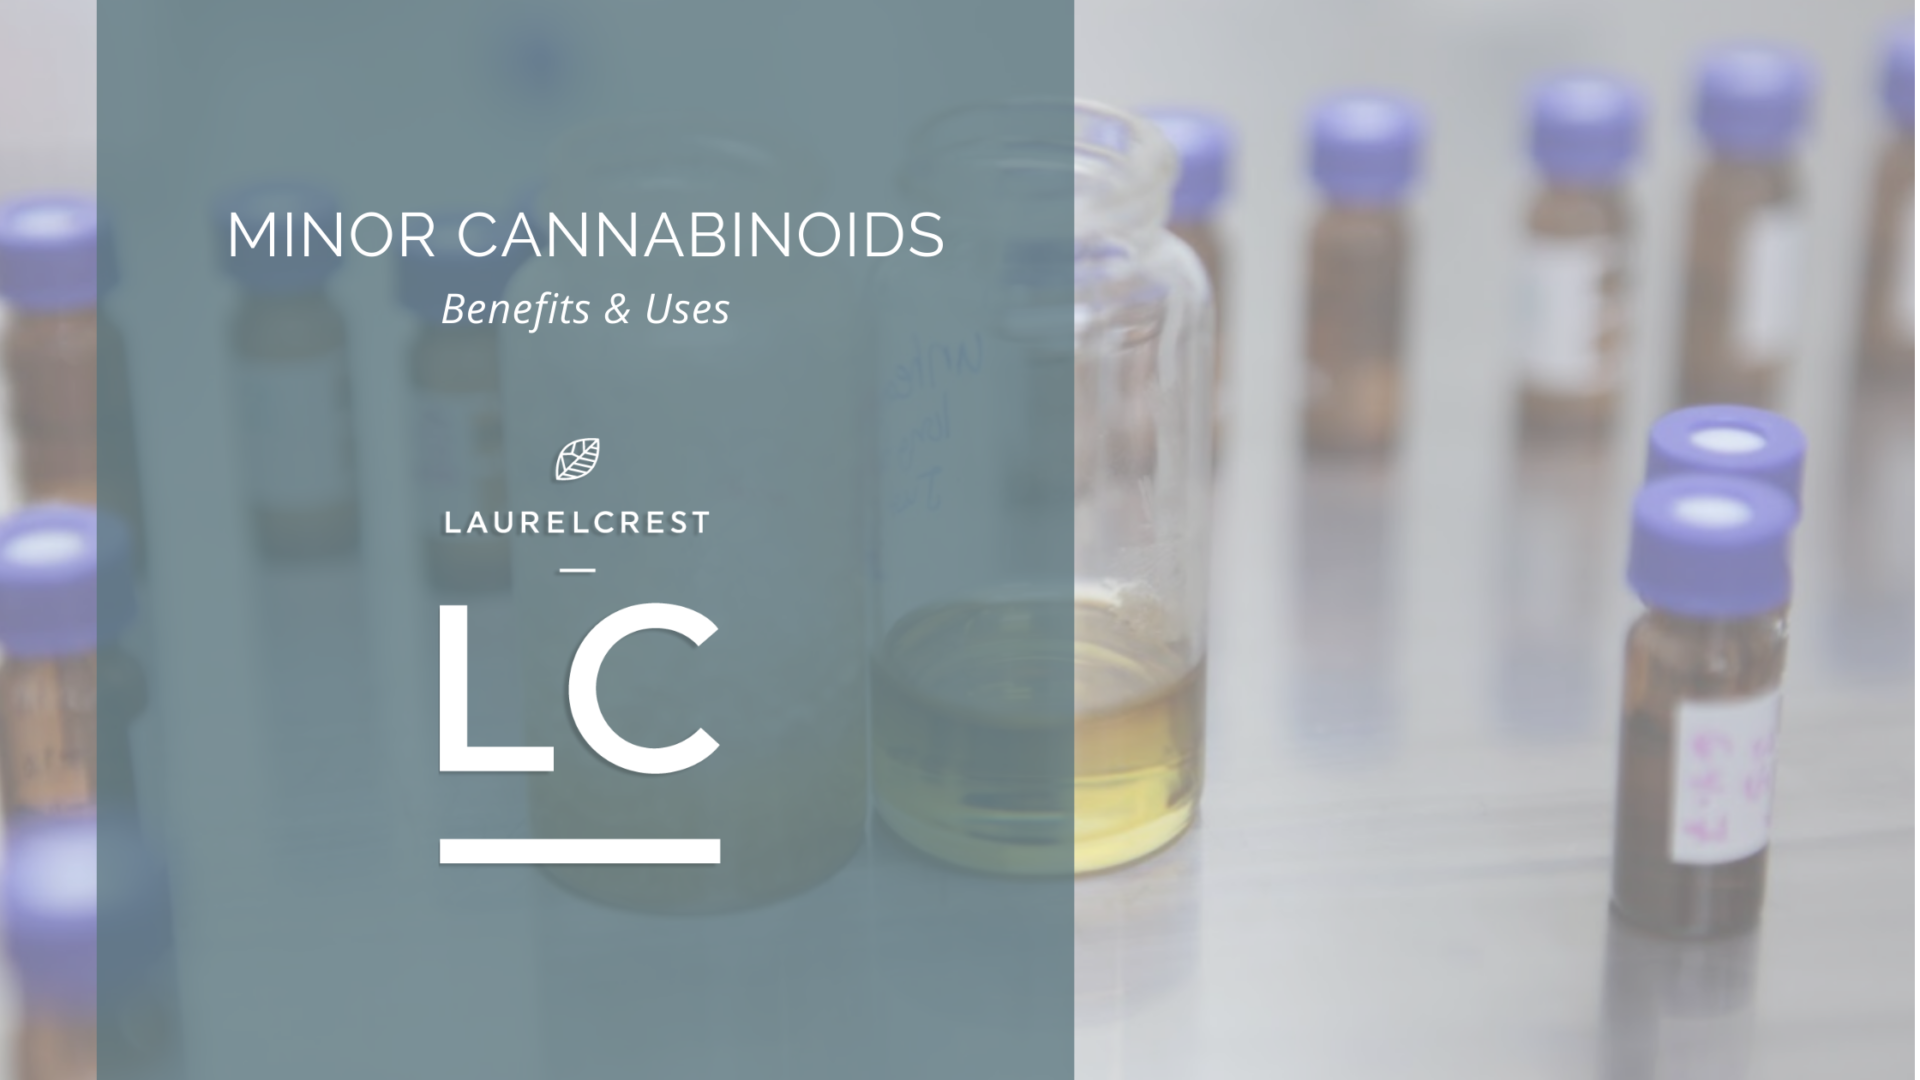 Tallk On Cbc Oil At The Marion Libarary Onthrusday - Cbd|Oil|Cbc|Benefits|Effects|Pain|Thc|Products|Health|Study|Cannabinoids|Cannabis|Anxiety|Studies|Hemp|Research|Symptoms|People|Treatment|System|Plant|Body|Inflammation|Product|Evidence|Receptors|Cancer|Side|Effect|Properties|Brain|Dose|Disease|Marijuana|Cannabidiol|Disorders|Cannabinoid|Way|Relief|Cells|Cbd Oil|Cbc Oil|Cbd Products|Side Effects|Endocannabinoid System|Chronic Pain|Cannabis Plant|Pain Relief|Cbd Oil Benefits|Cannabis Oil|Health Benefits|Multiple Sclerosis|Hemp Plant|Anti-Inflammatory Properties|Blood Pressure|Entourage Effect|Neuropathic Pain|Cbd Product|Hemp Oil|Full-Spectrum Cbd Oil|Nervous System|Hemp Seed Oil|High Blood Pressure|Immune System|Cbd Gummies|Cannabis Oil Benefits|Drug Administration|Anxiety Disorders|Dravet Syndrome|Lennox-Gastaut Syndrome